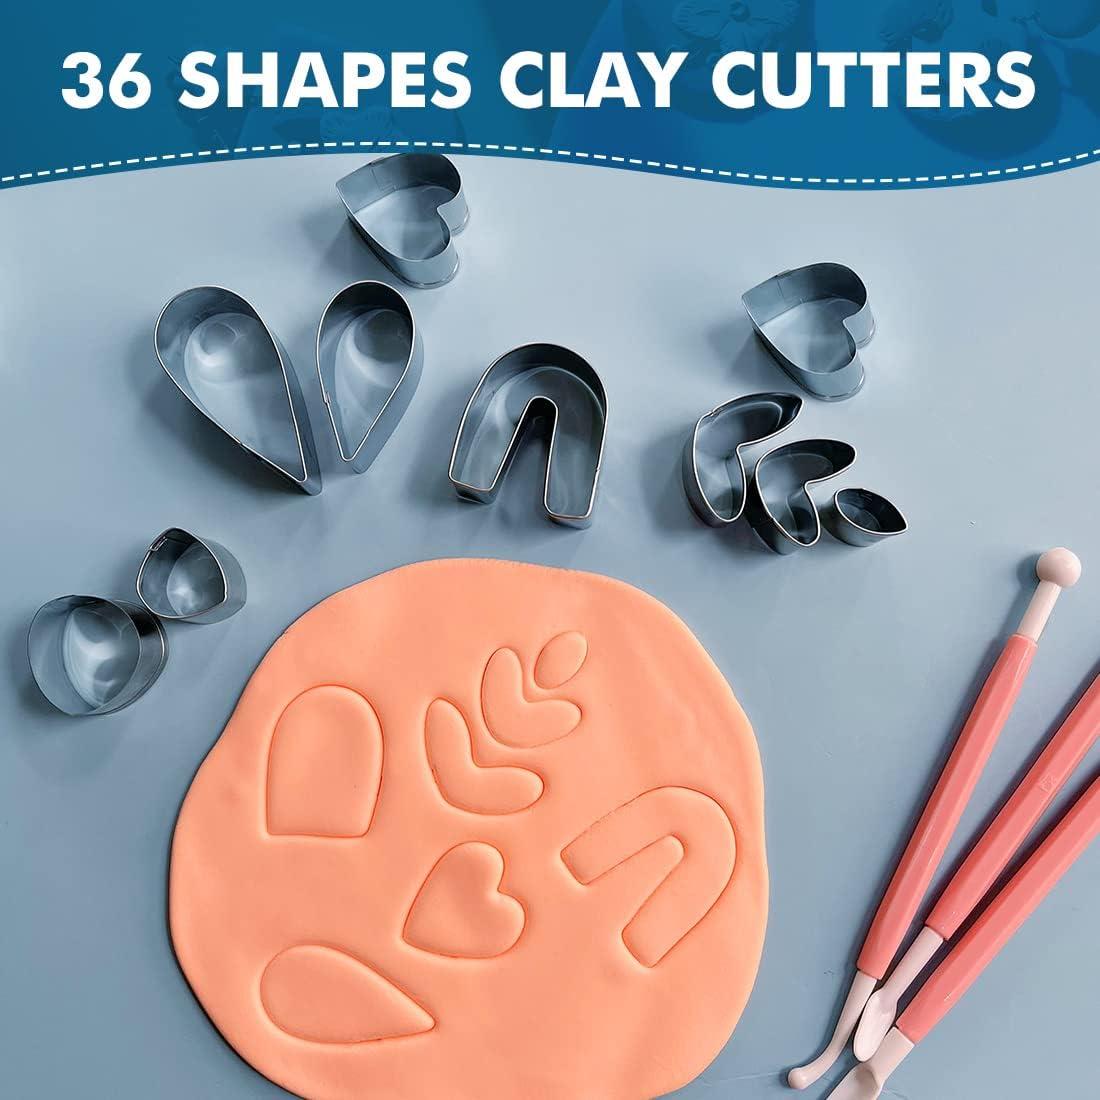 keoker Polymer Clay Cutters Set, 36 Shapes Stainless Steel Clay Cutters  with 40 Circle Shape Cutters and 50 Earrings Accessories, Clay Earing  Cutters for Polymer Clay Jewelry Making